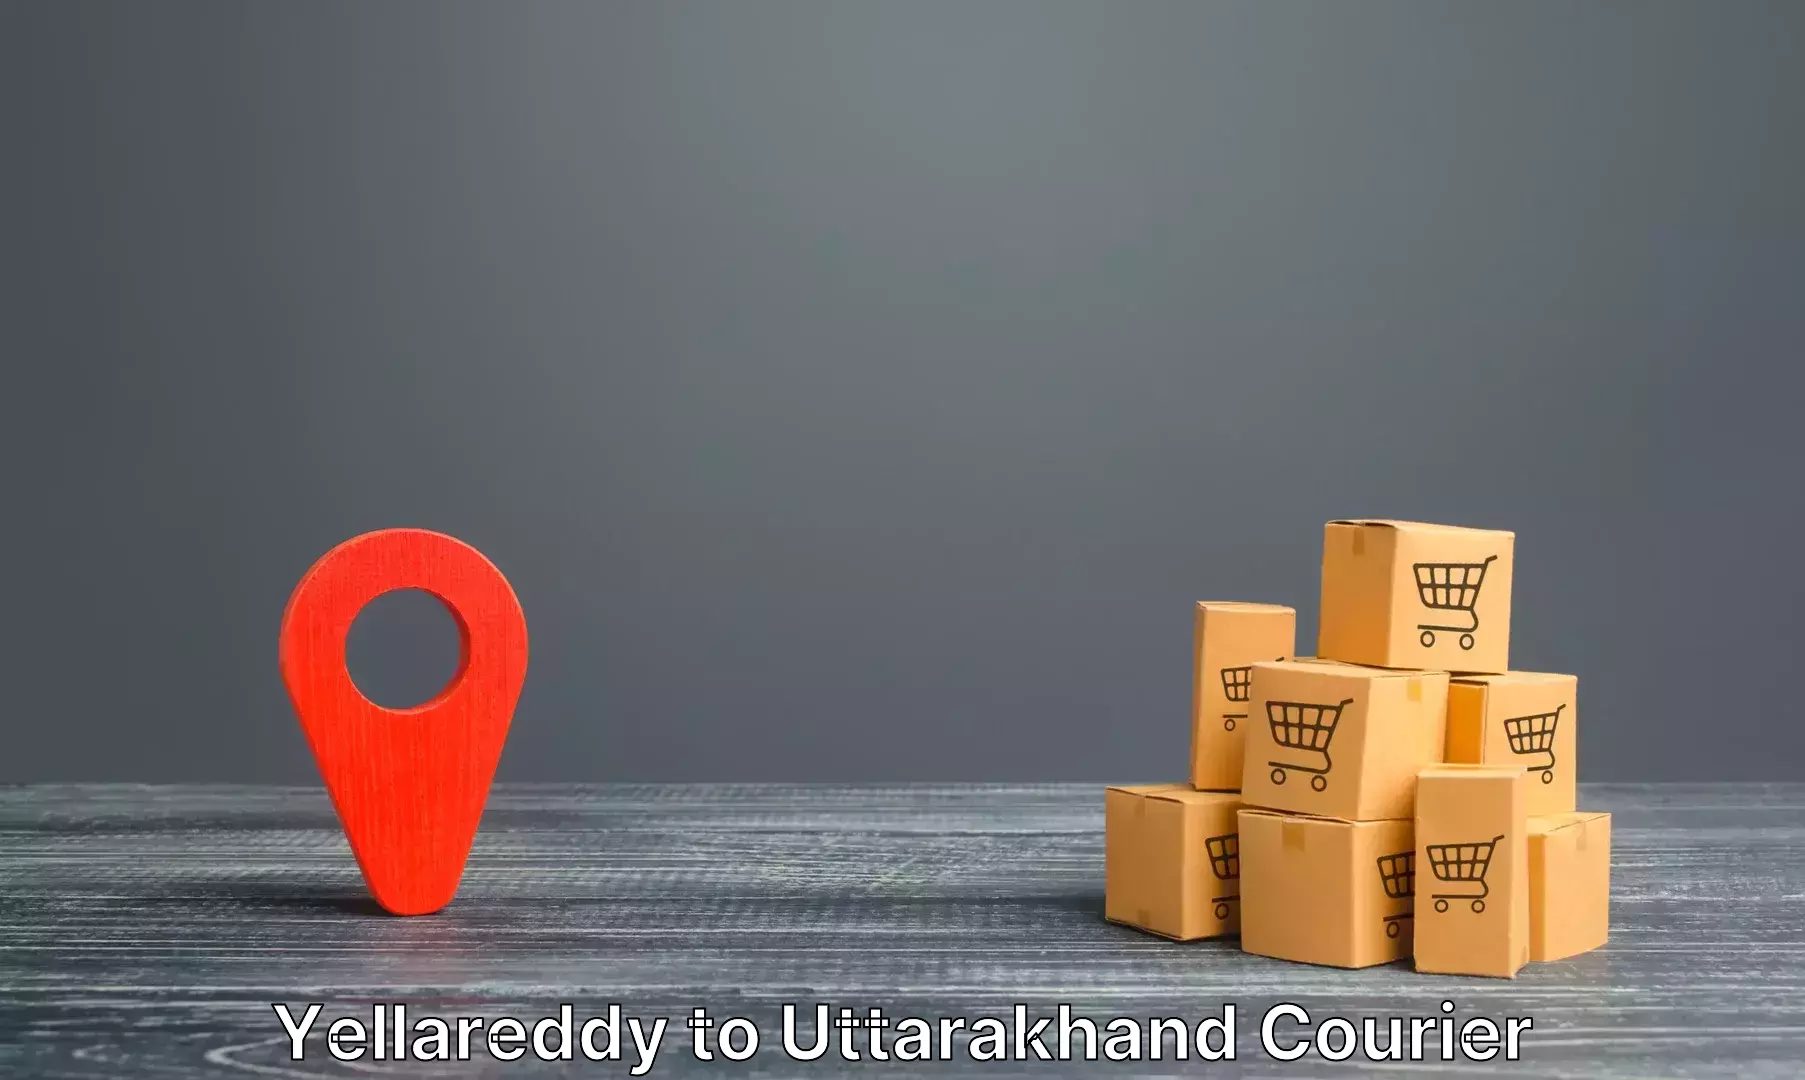 Baggage delivery management Yellareddy to Lansdowne